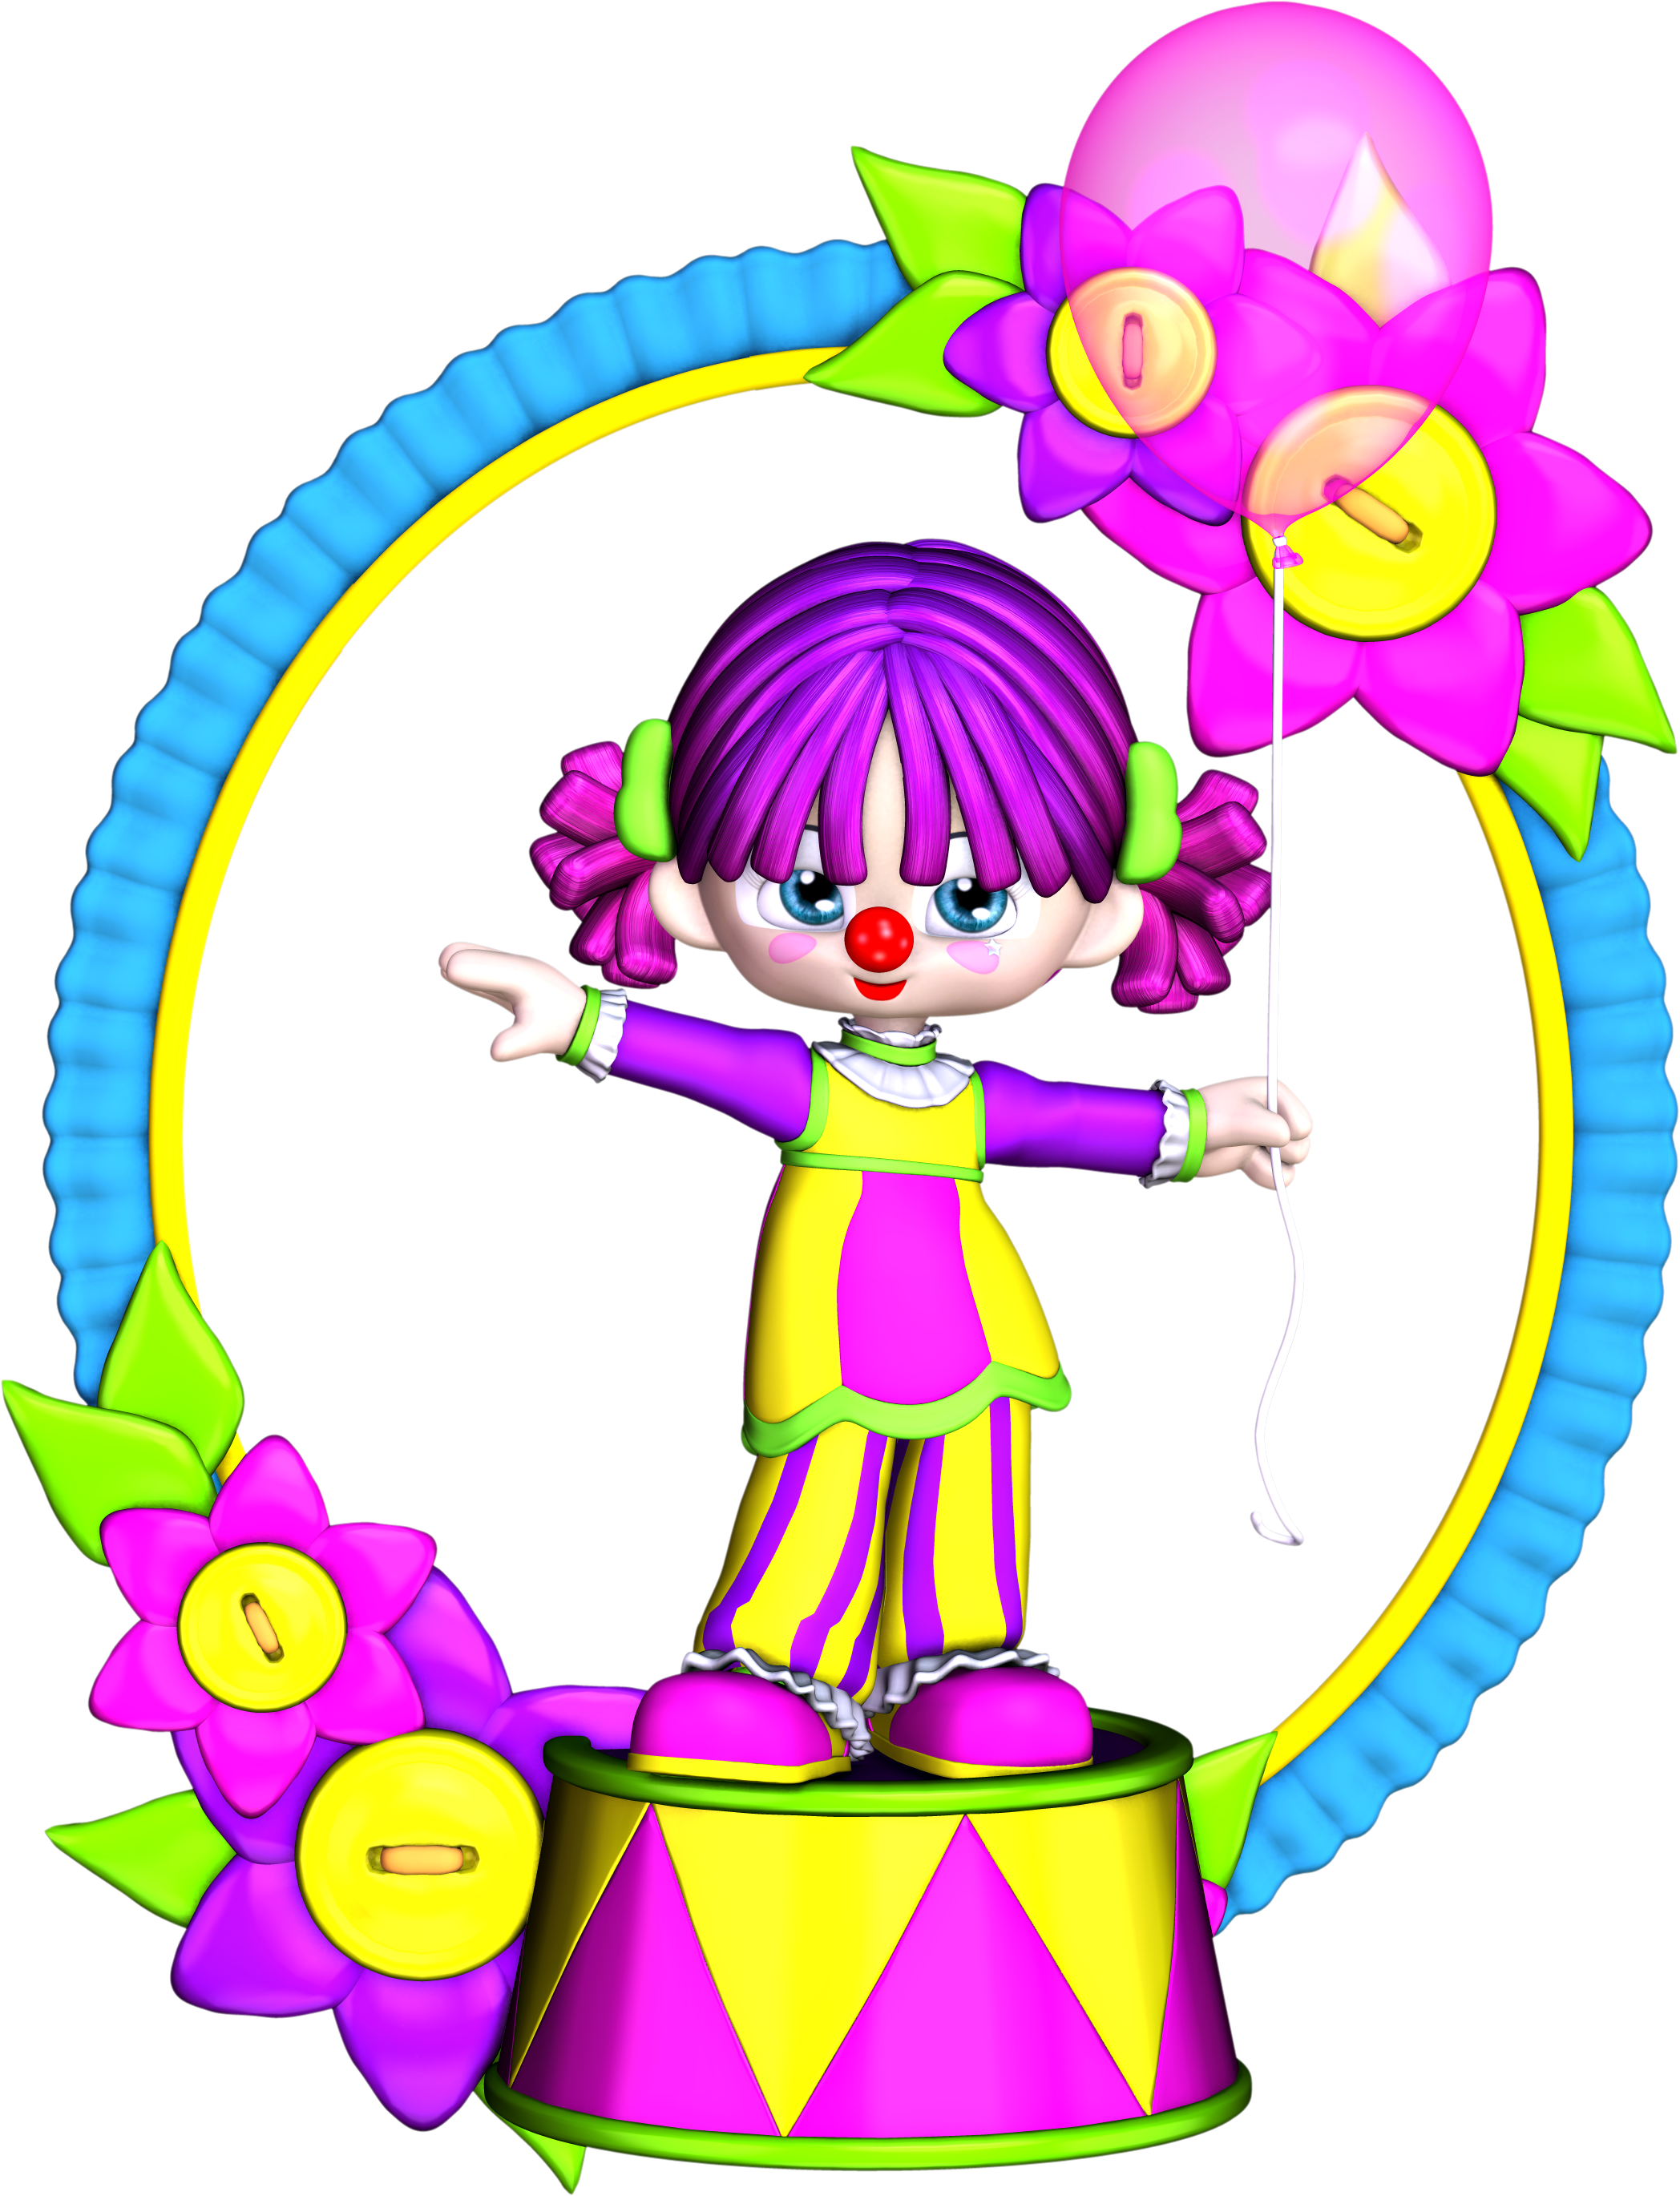 0 images about clowns on clown faces picasa and clipart clipartix